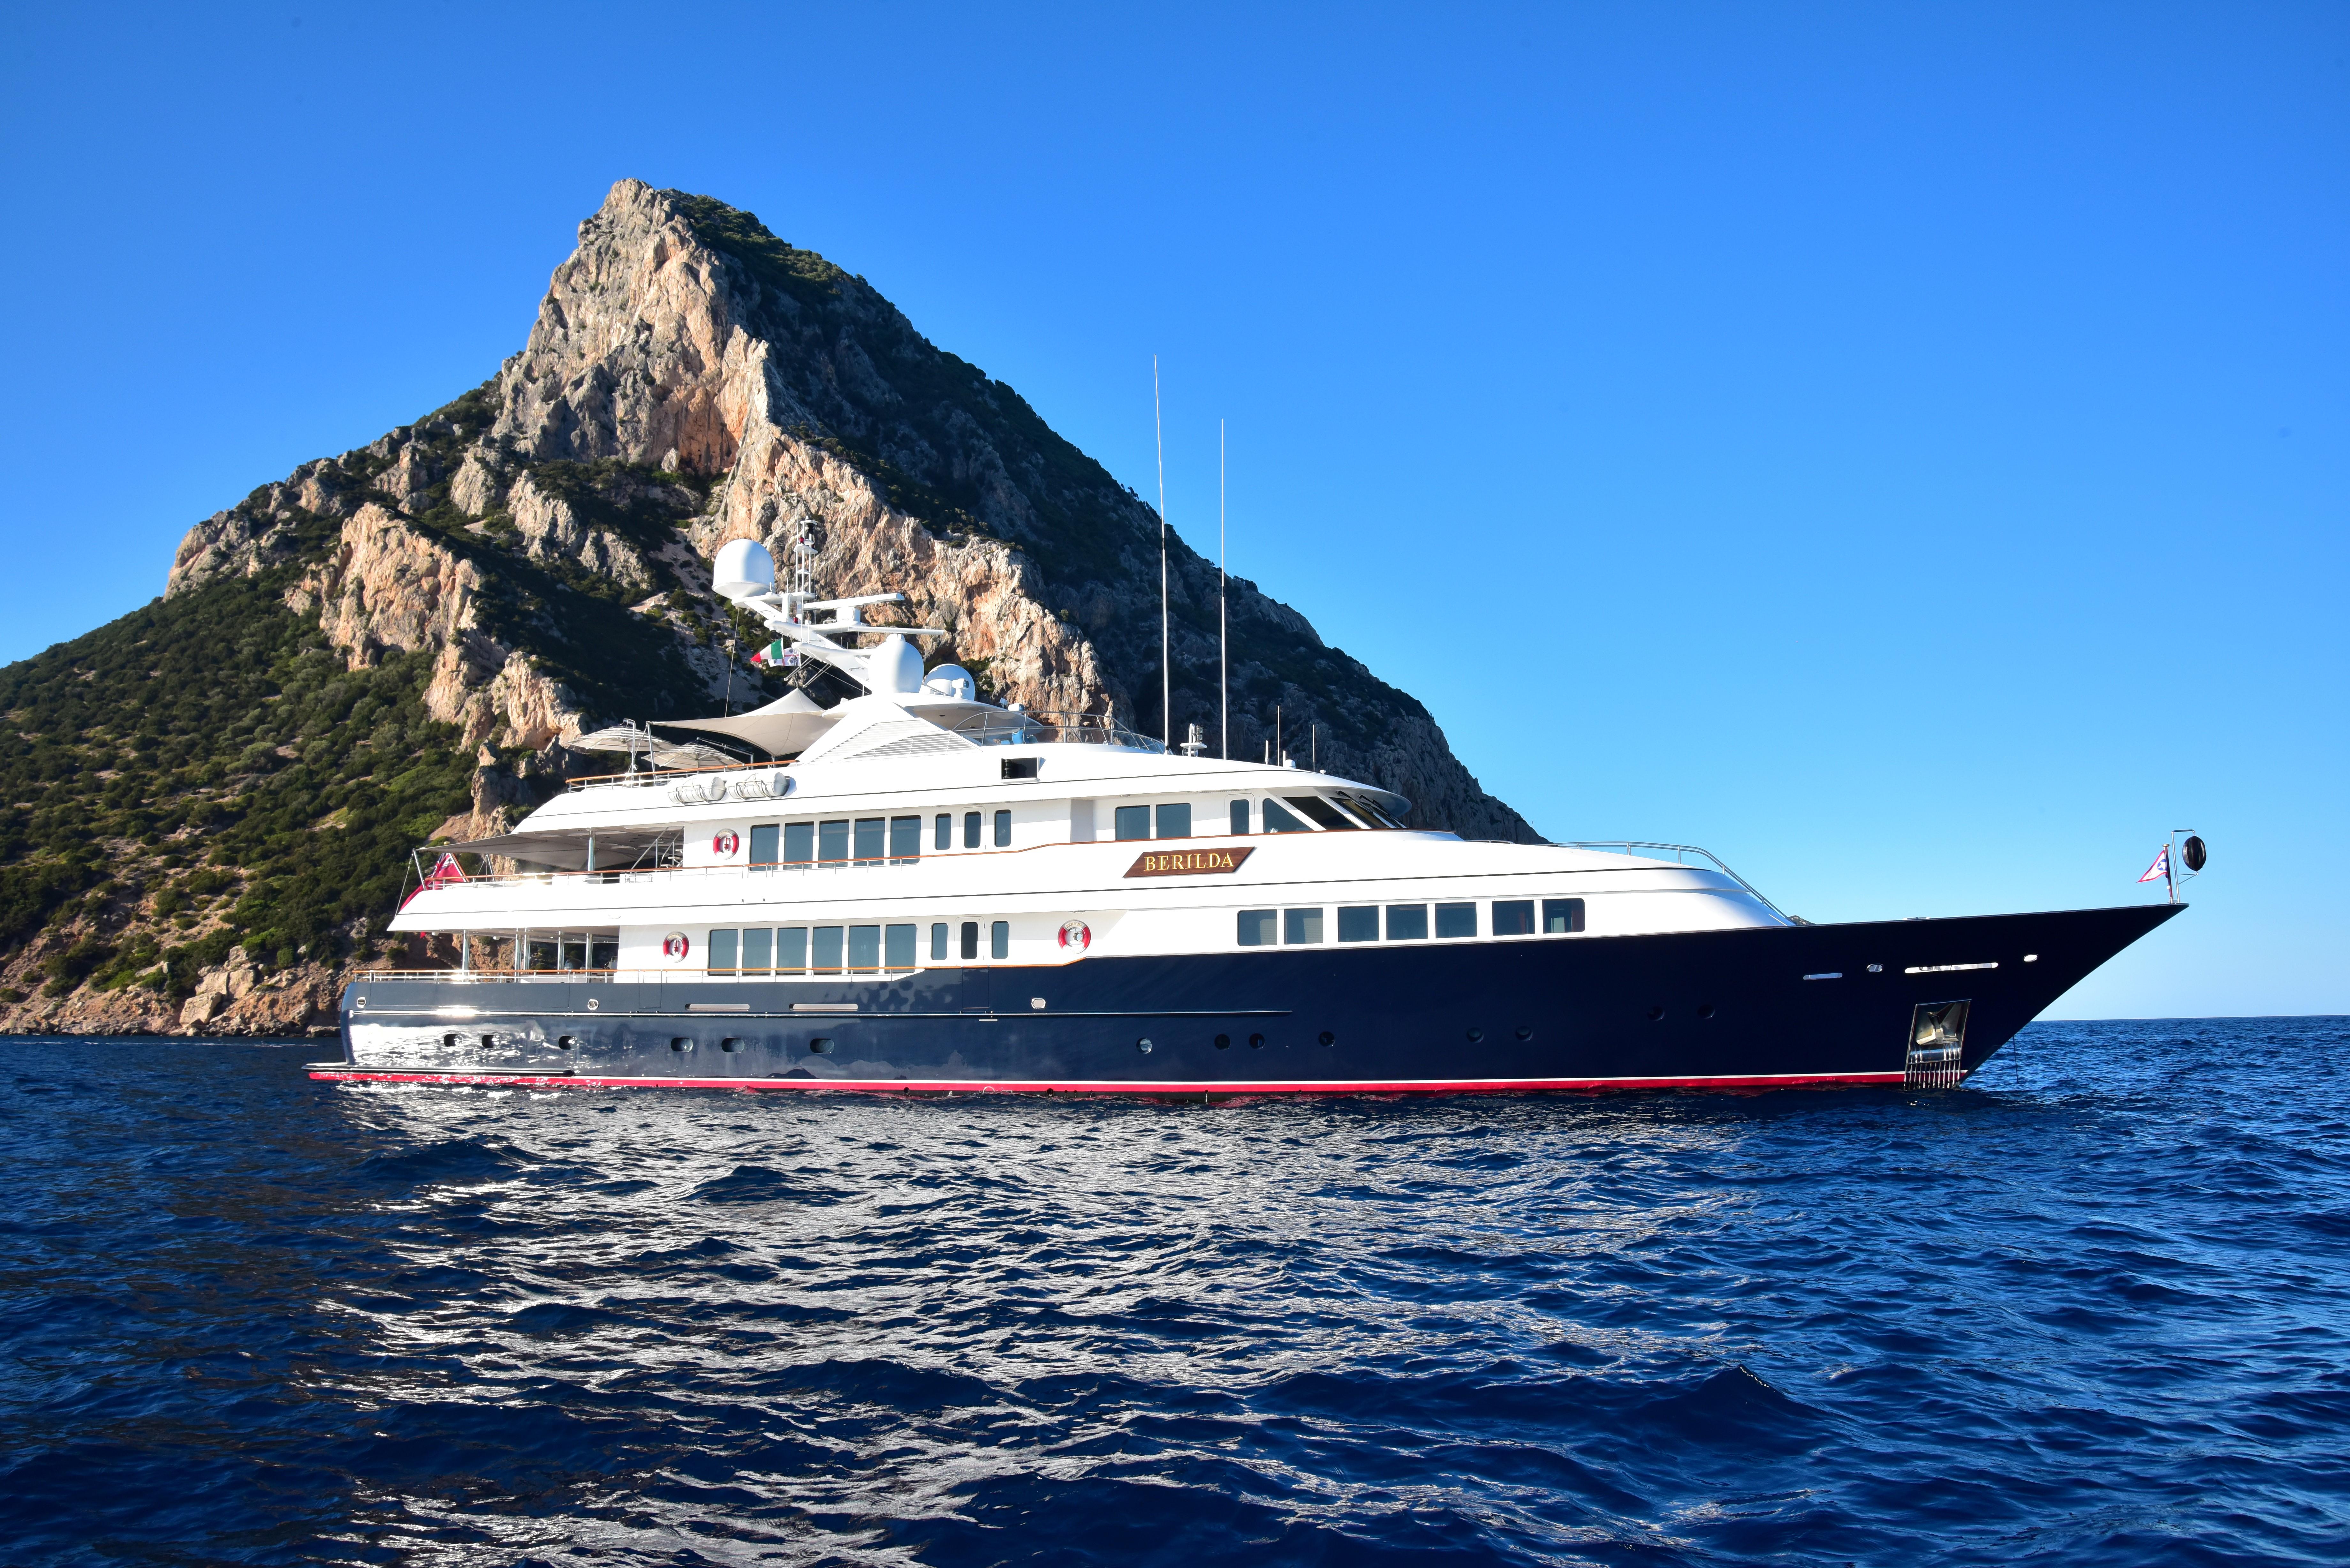 DRIZZLE Yacht for Sale is a 225' 8 Feadship Motor Yacht